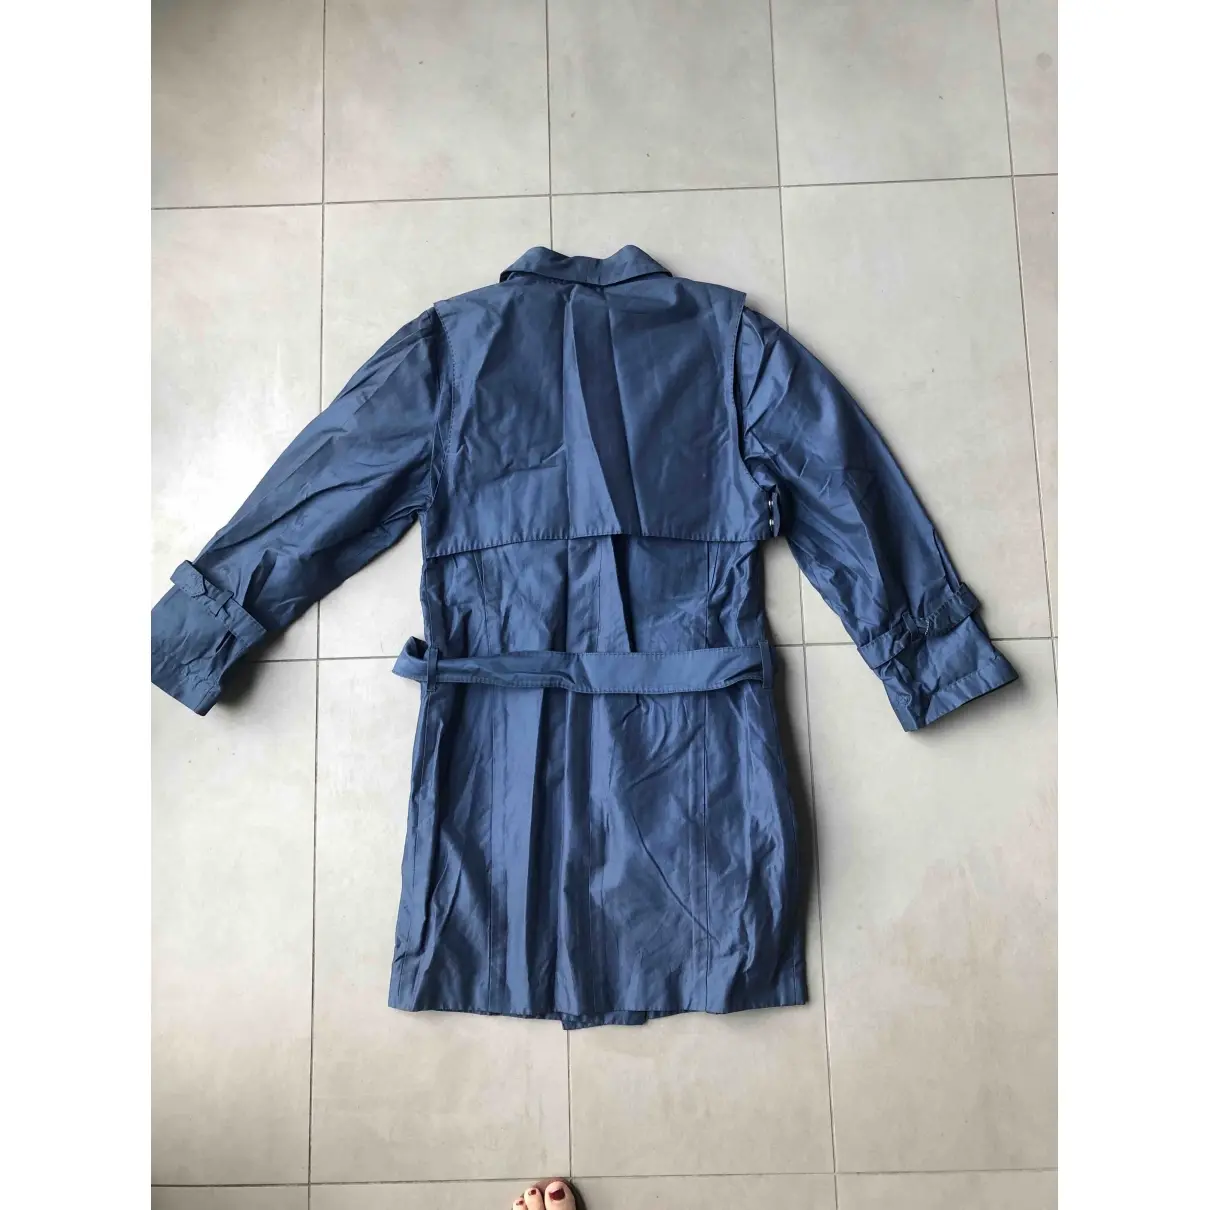 Costume National Trench coat for sale - Vintage